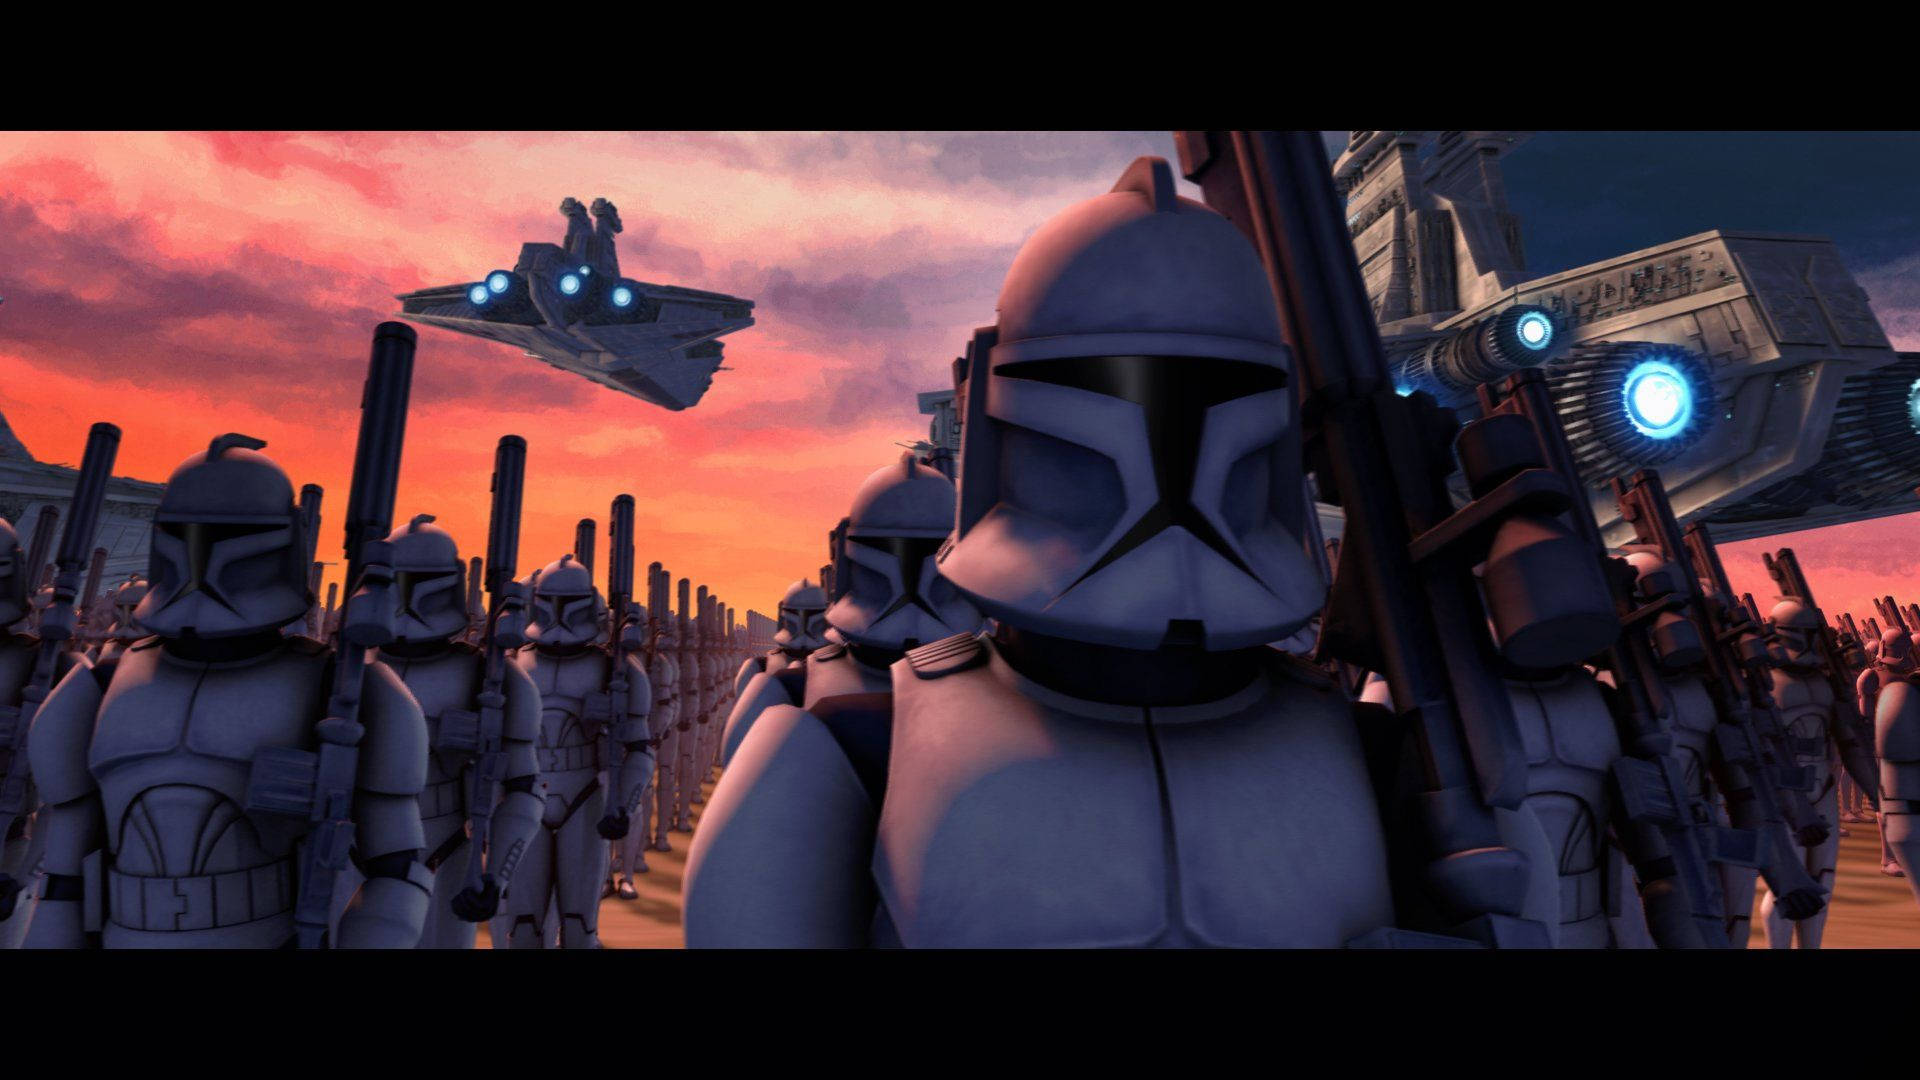 Clone Trooper Army Ready for Battle Wallpaper